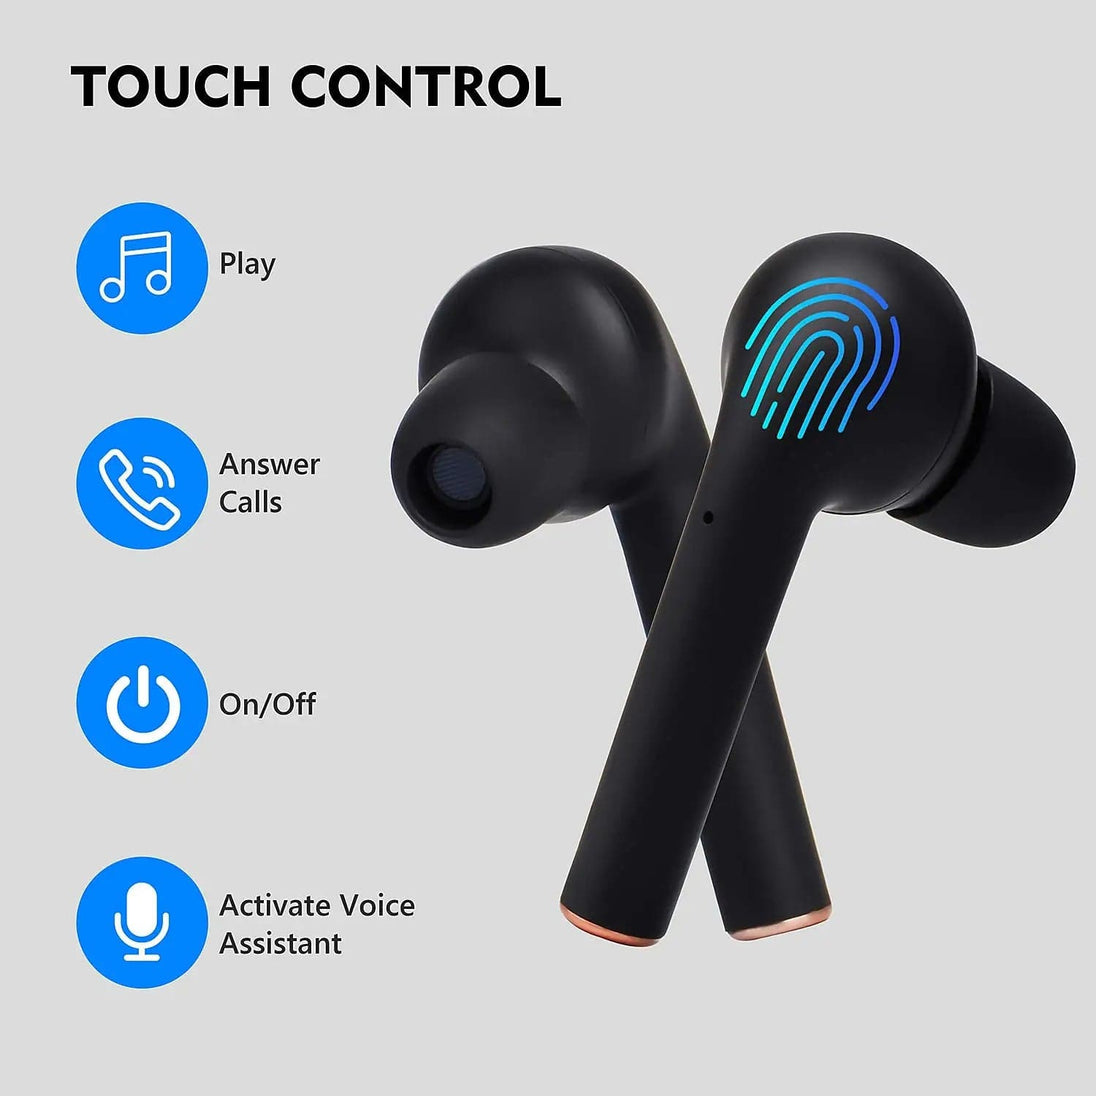 Hot Selling Electronics Fast pairing TWS 5.0 True Wireless Earbuds Earphone & Headphone with power display